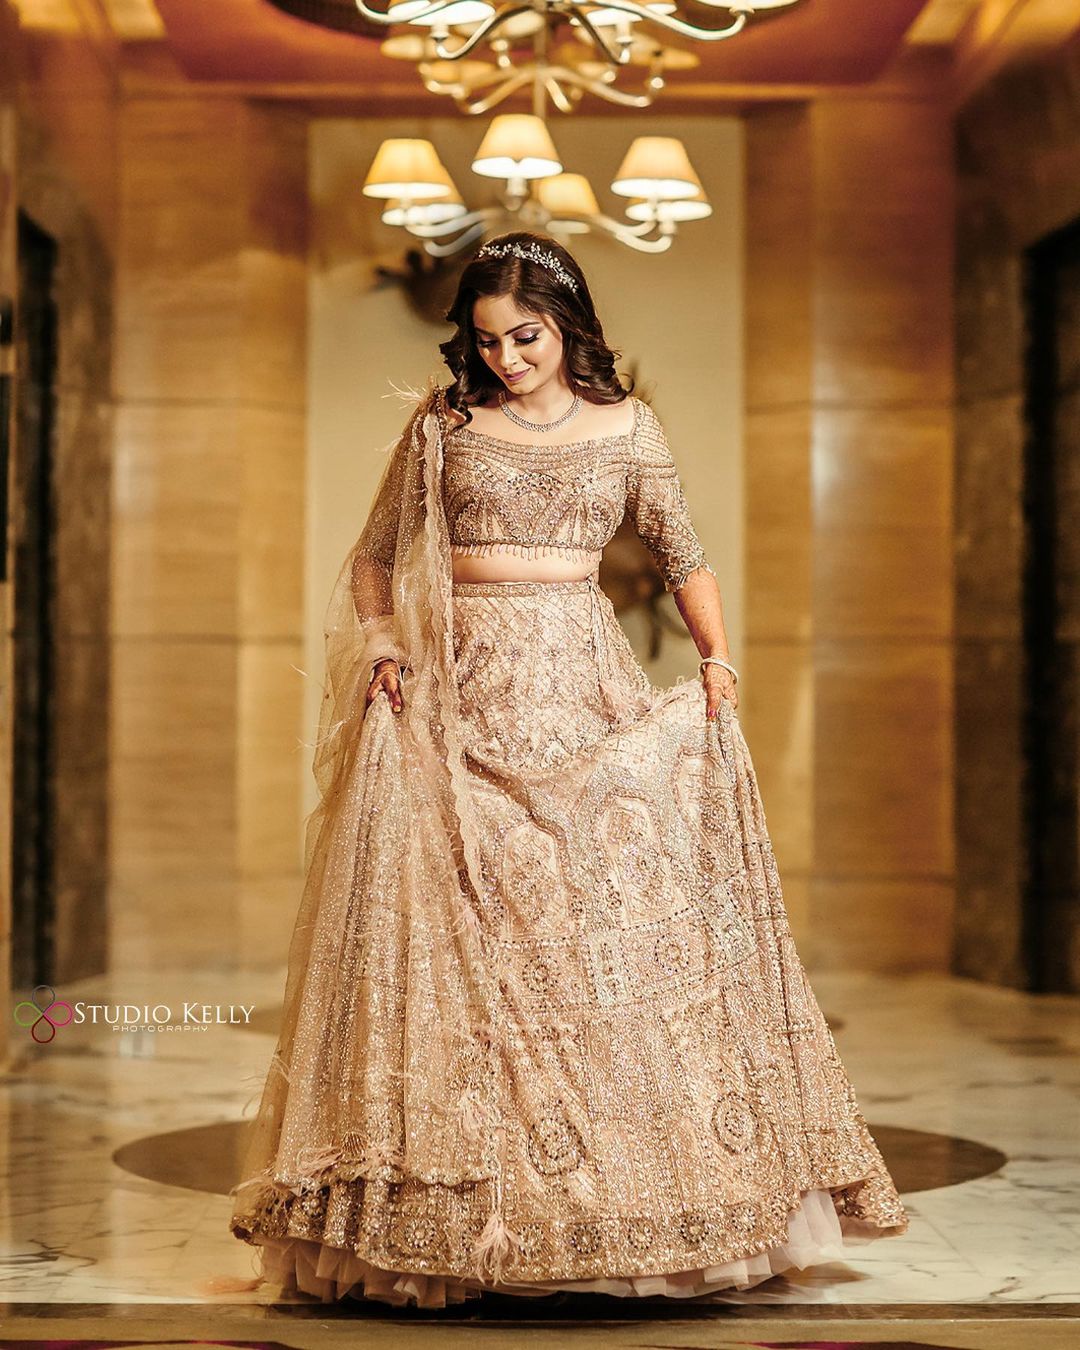 Experience more than 227 engagement lehenga look best